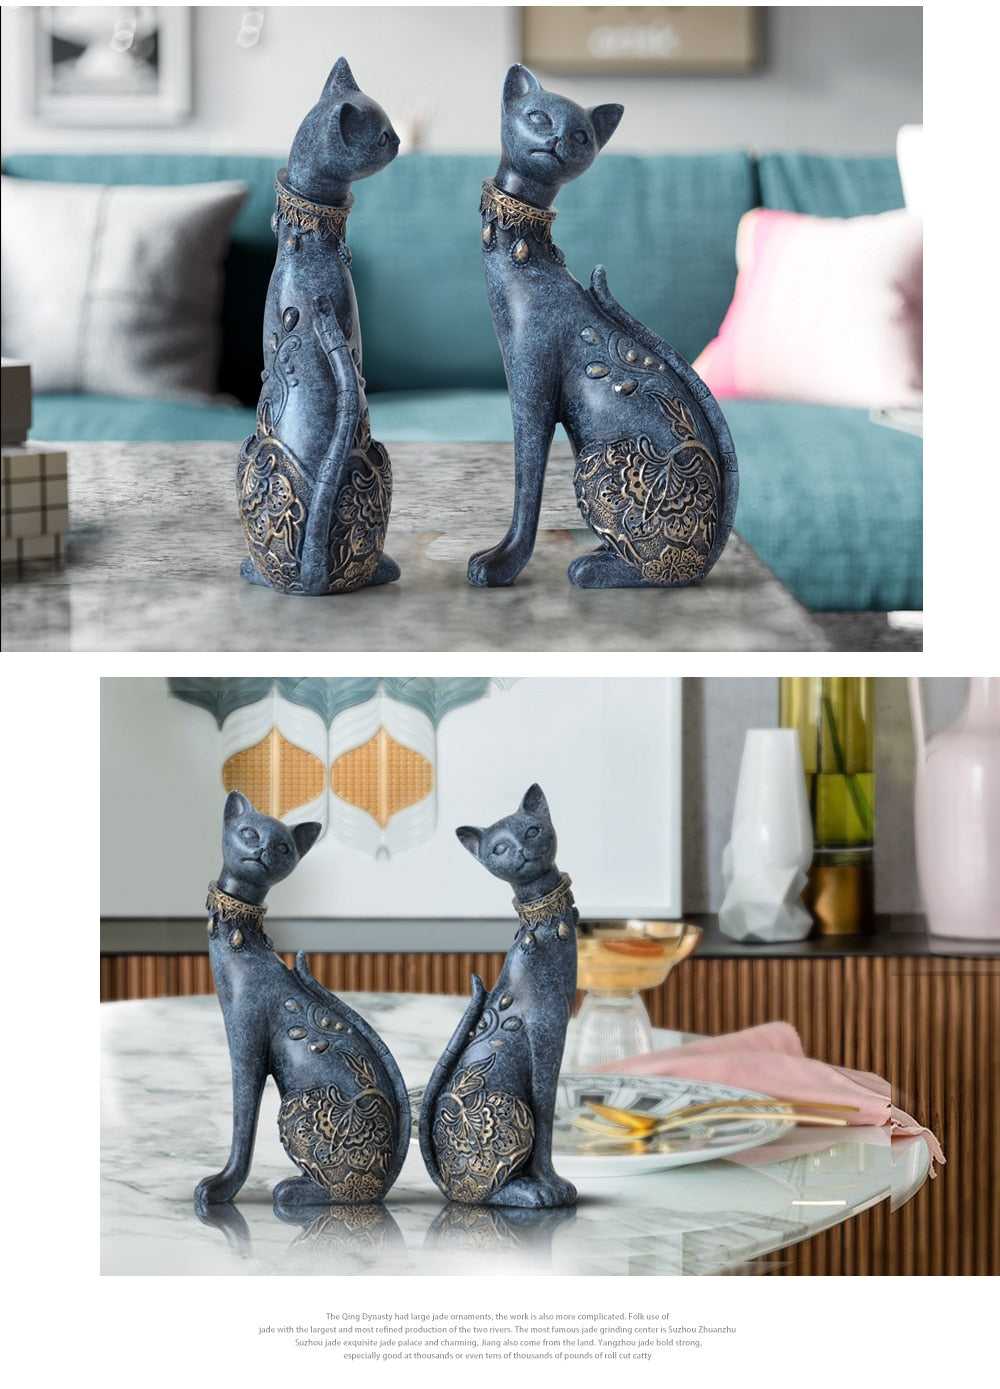 Hand-Painted Ceramic Cat Figurines from Peru (Set of 3) - Colorful Kittens